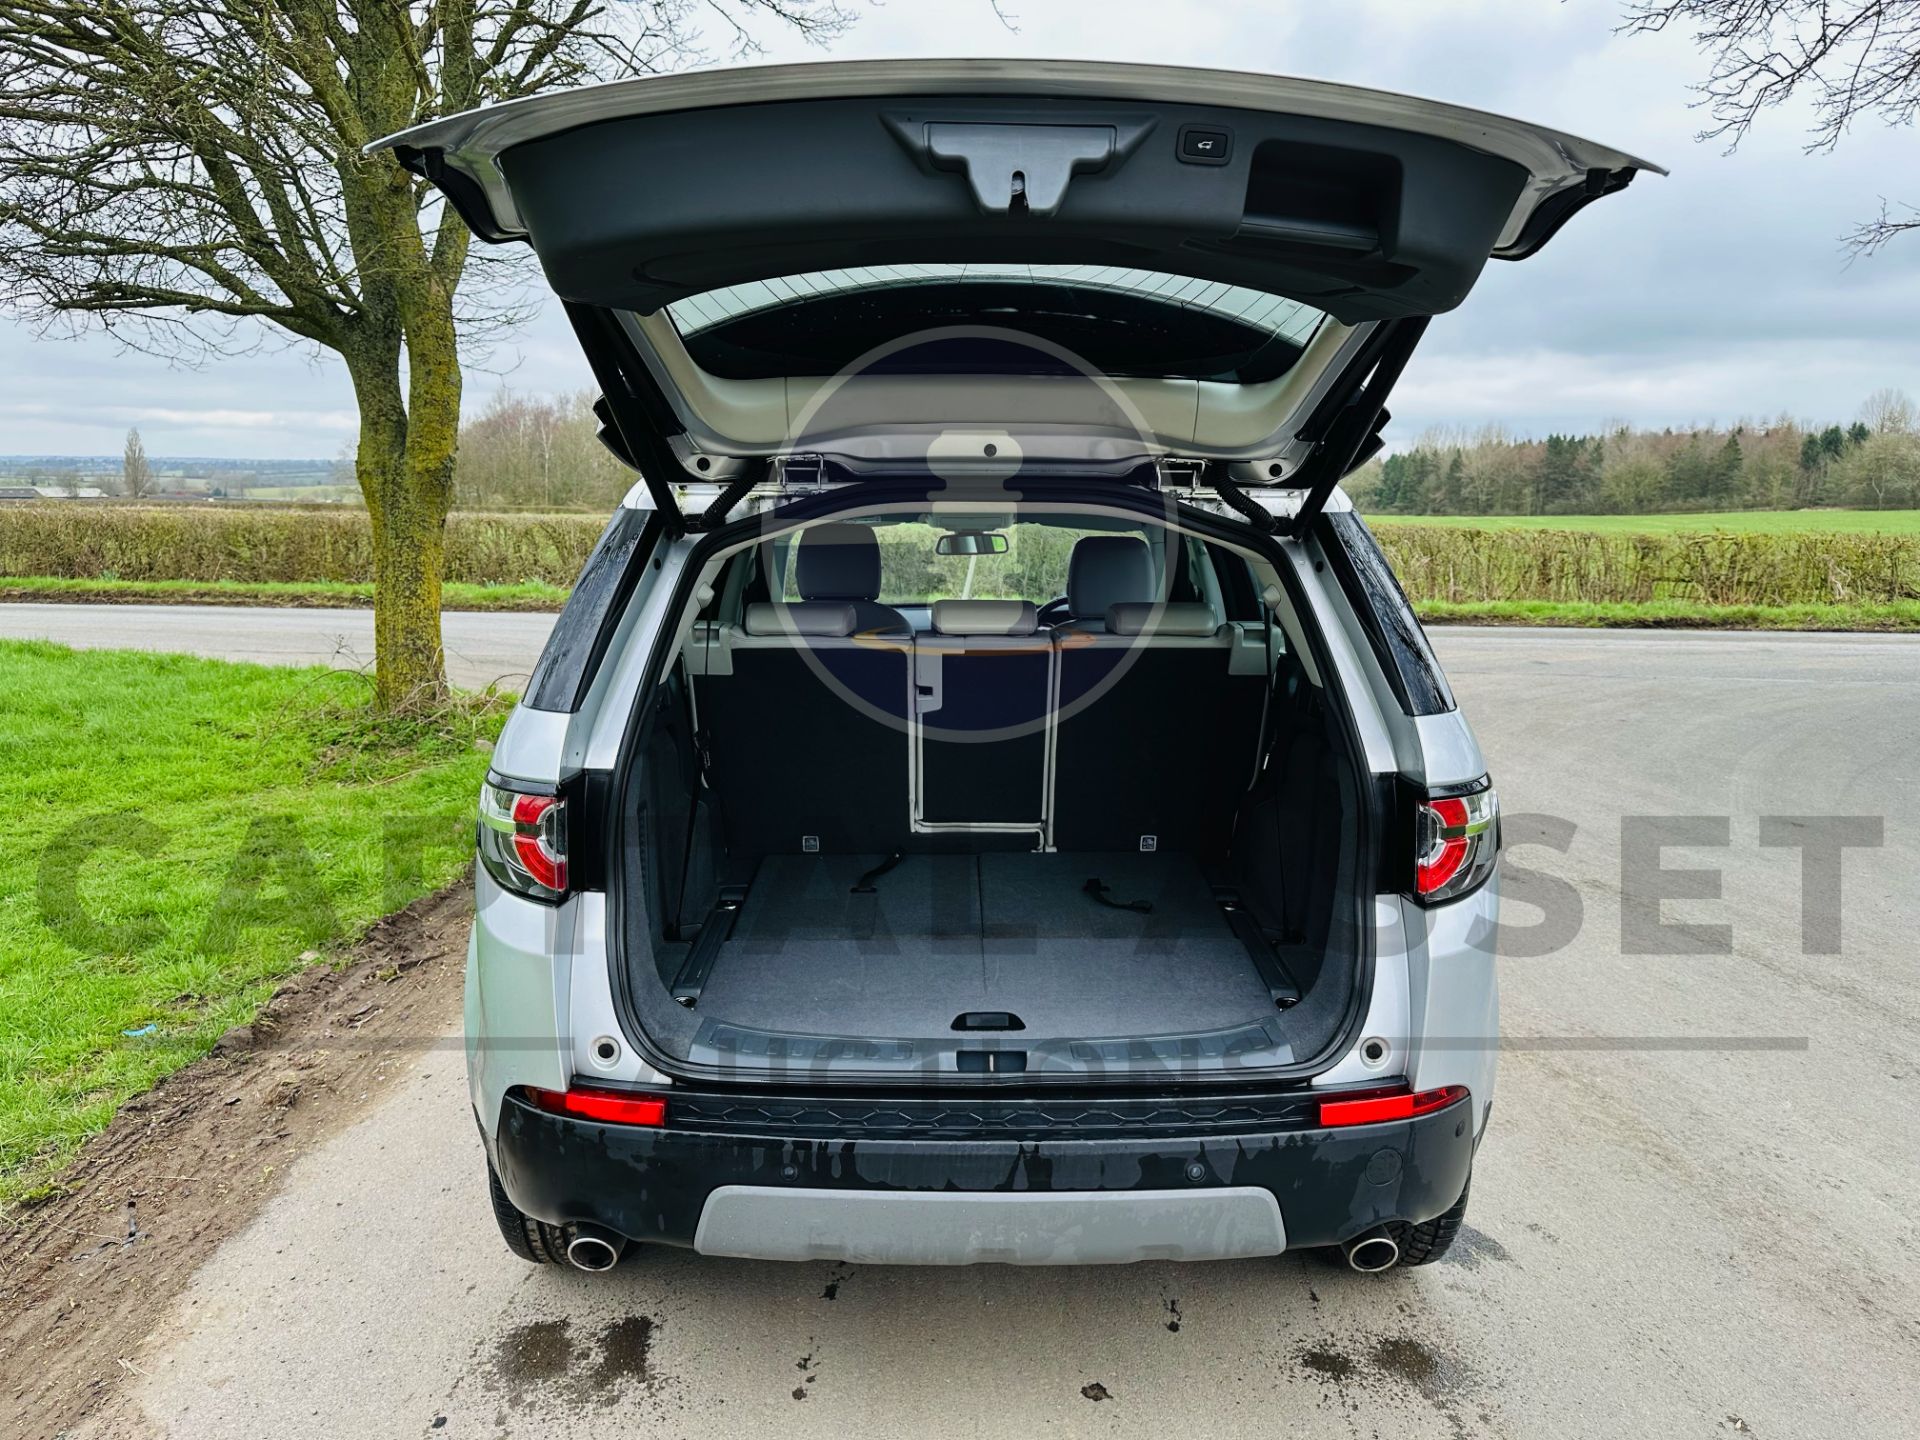 LAND ROVER DISCOVERY SPORT *SE TECH* 7 SEATER SUV (65 REG - EURO 6) 2.0 TD4 - AUTOMATIC - Image 13 of 38